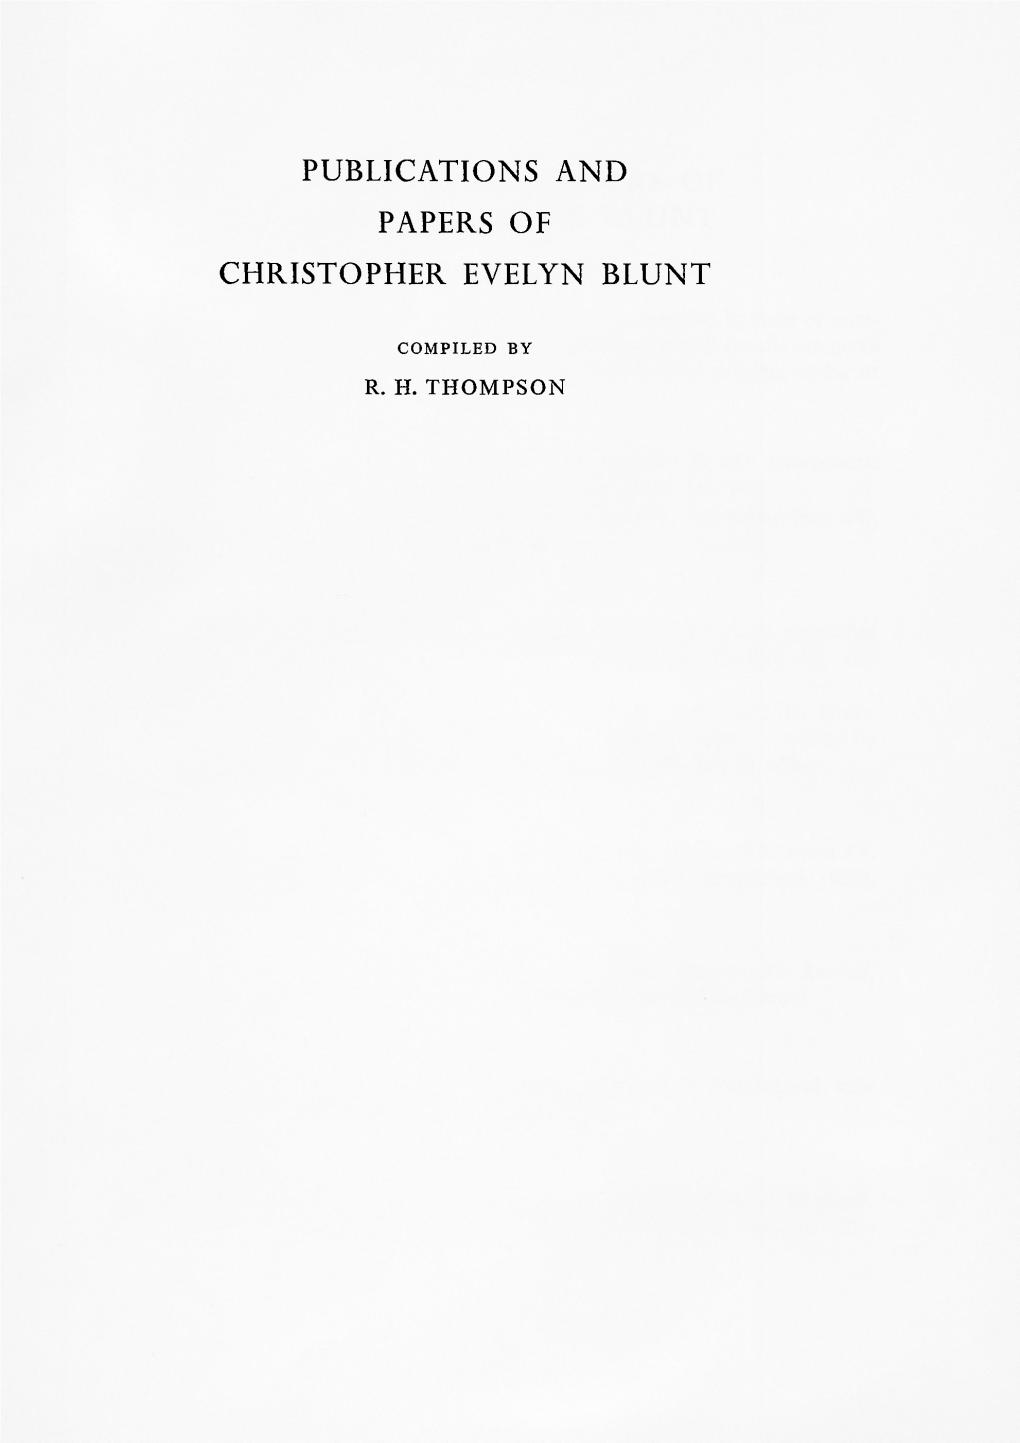 Publications and Papers of Christopher Evelyn Blunt